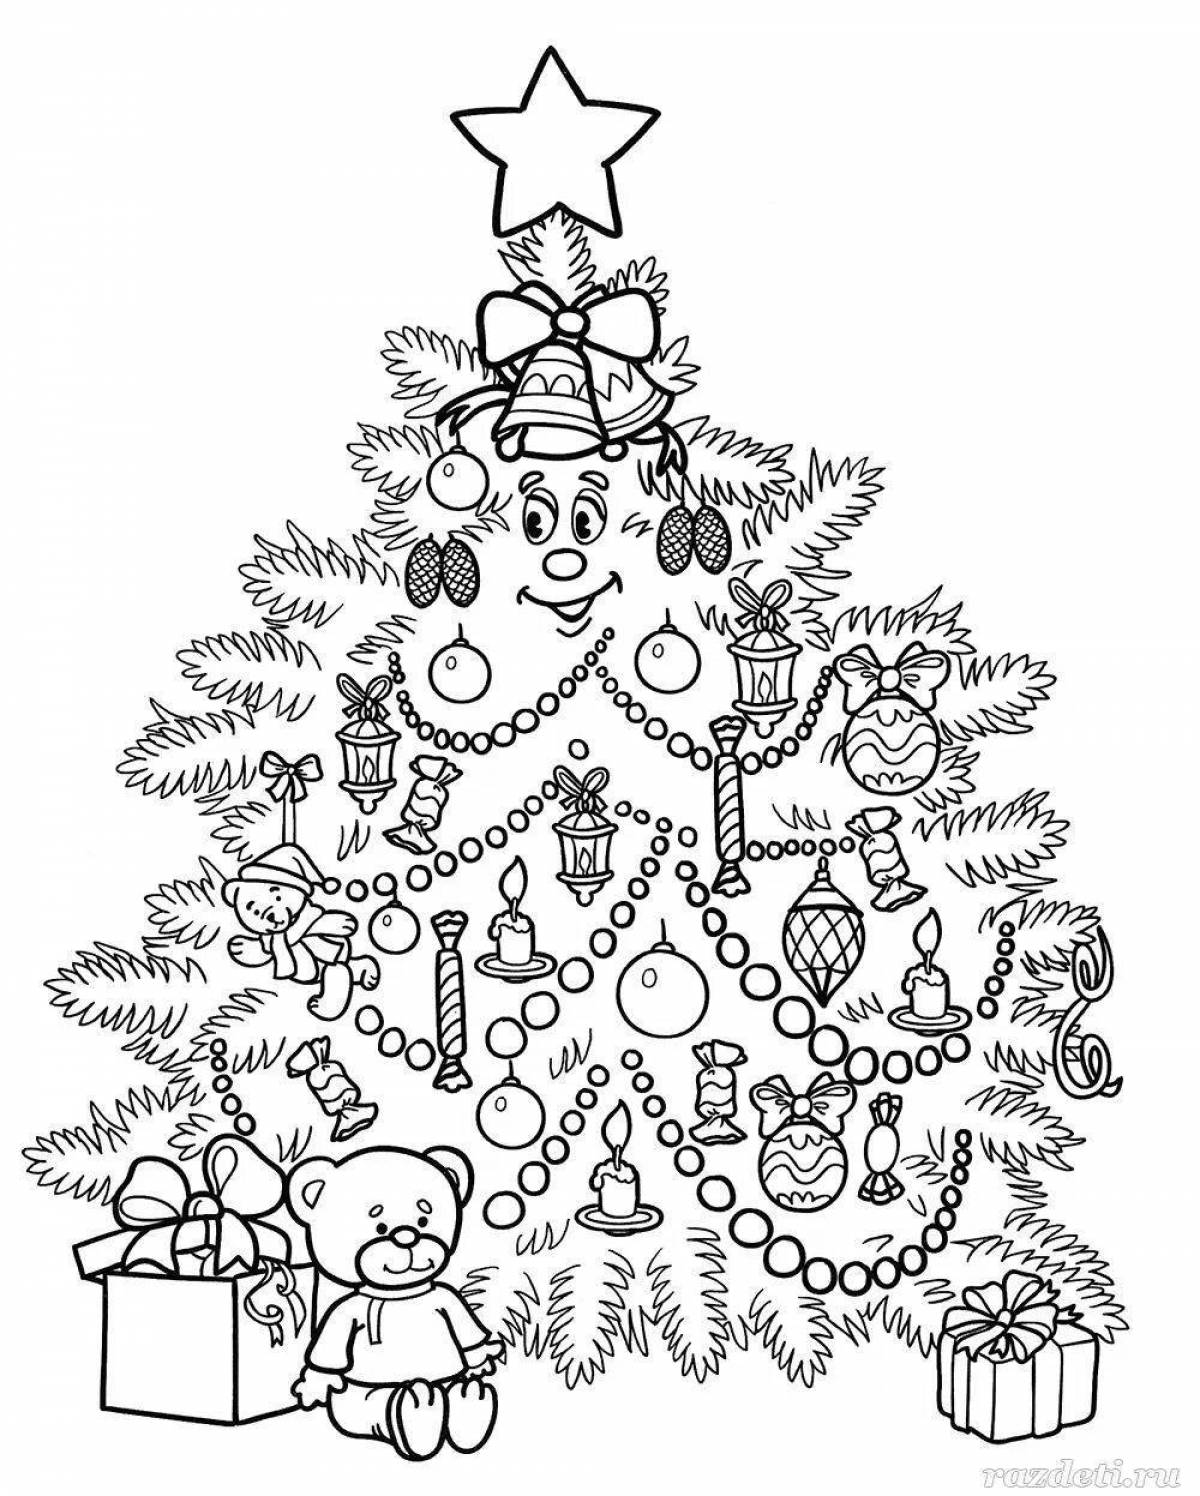 Amazing Christmas tree coloring page for 6-7 year olds